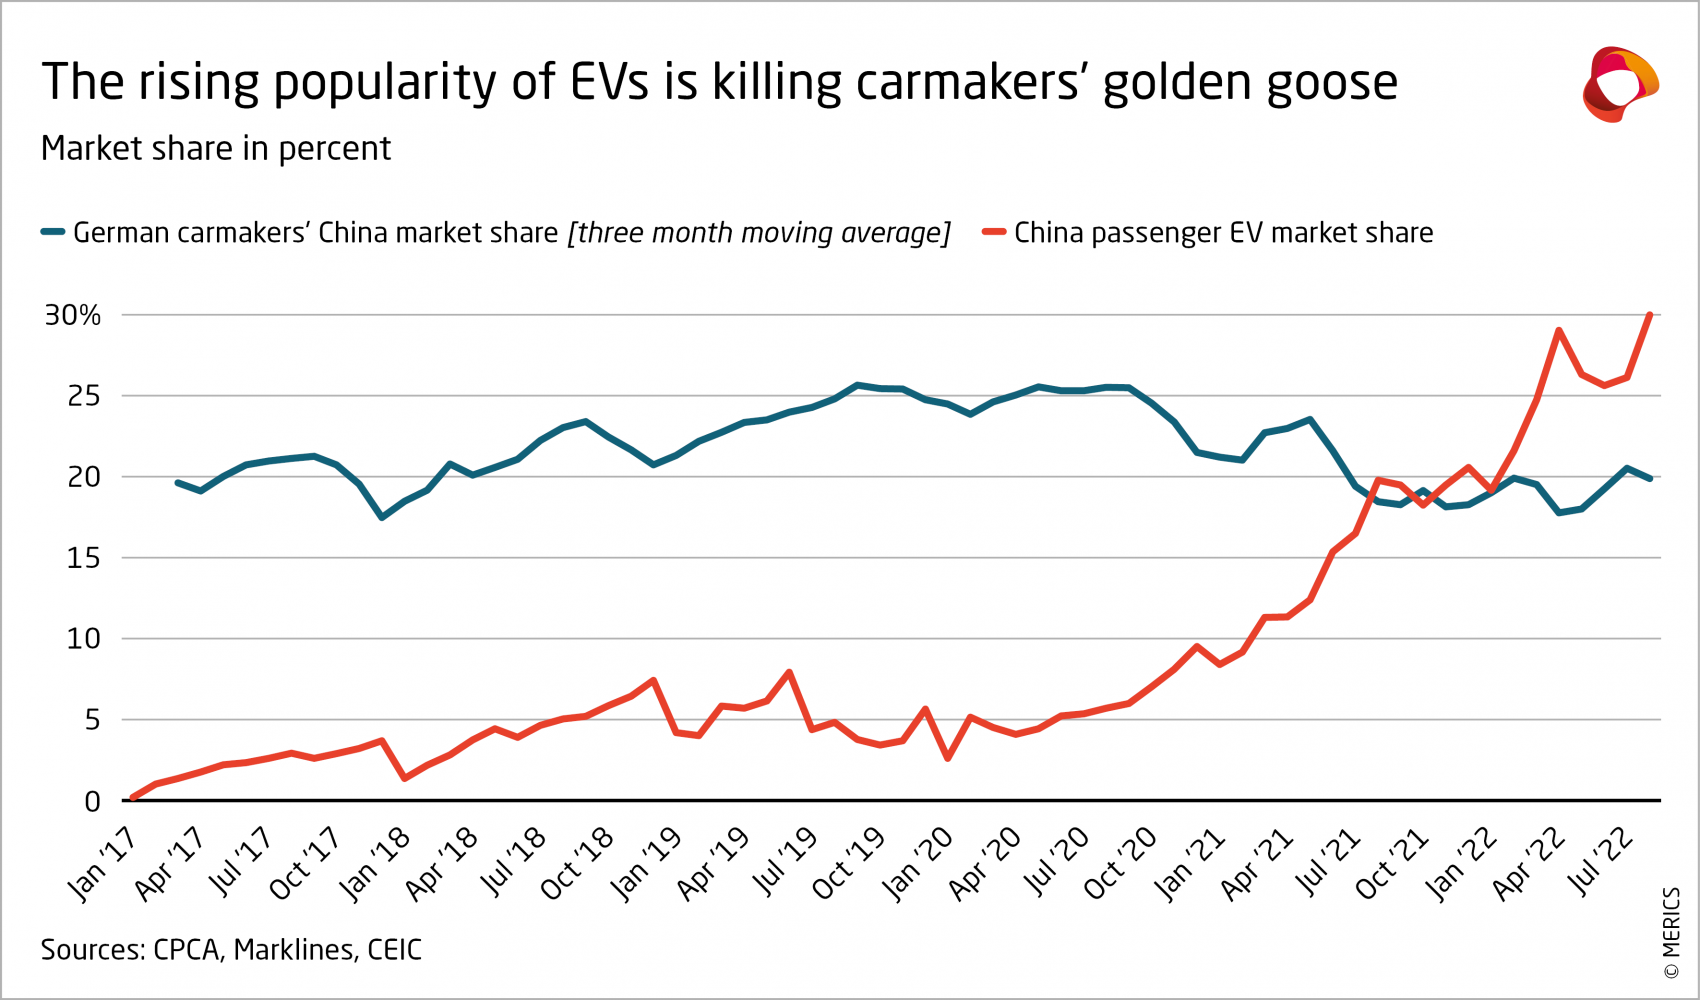 MERICS-Automotive-RD-in-China-The-rising-popularity-of-EVs-is-killing-carmakers-golden-goose-Exhibit-3.png